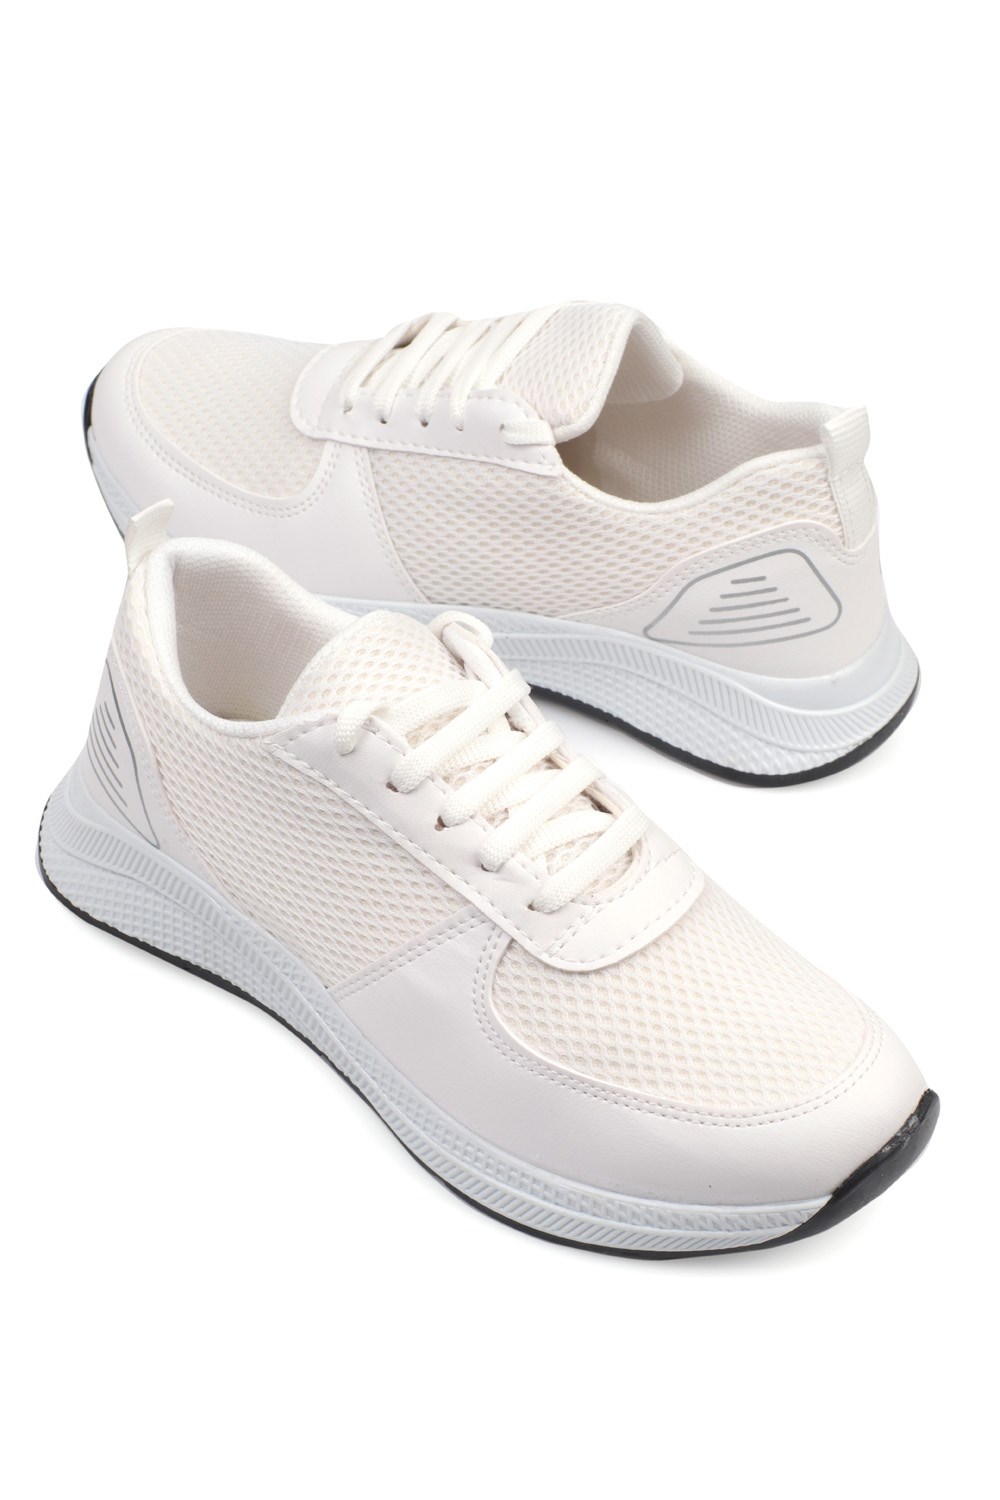 Capone Comfort Netted Sneaker